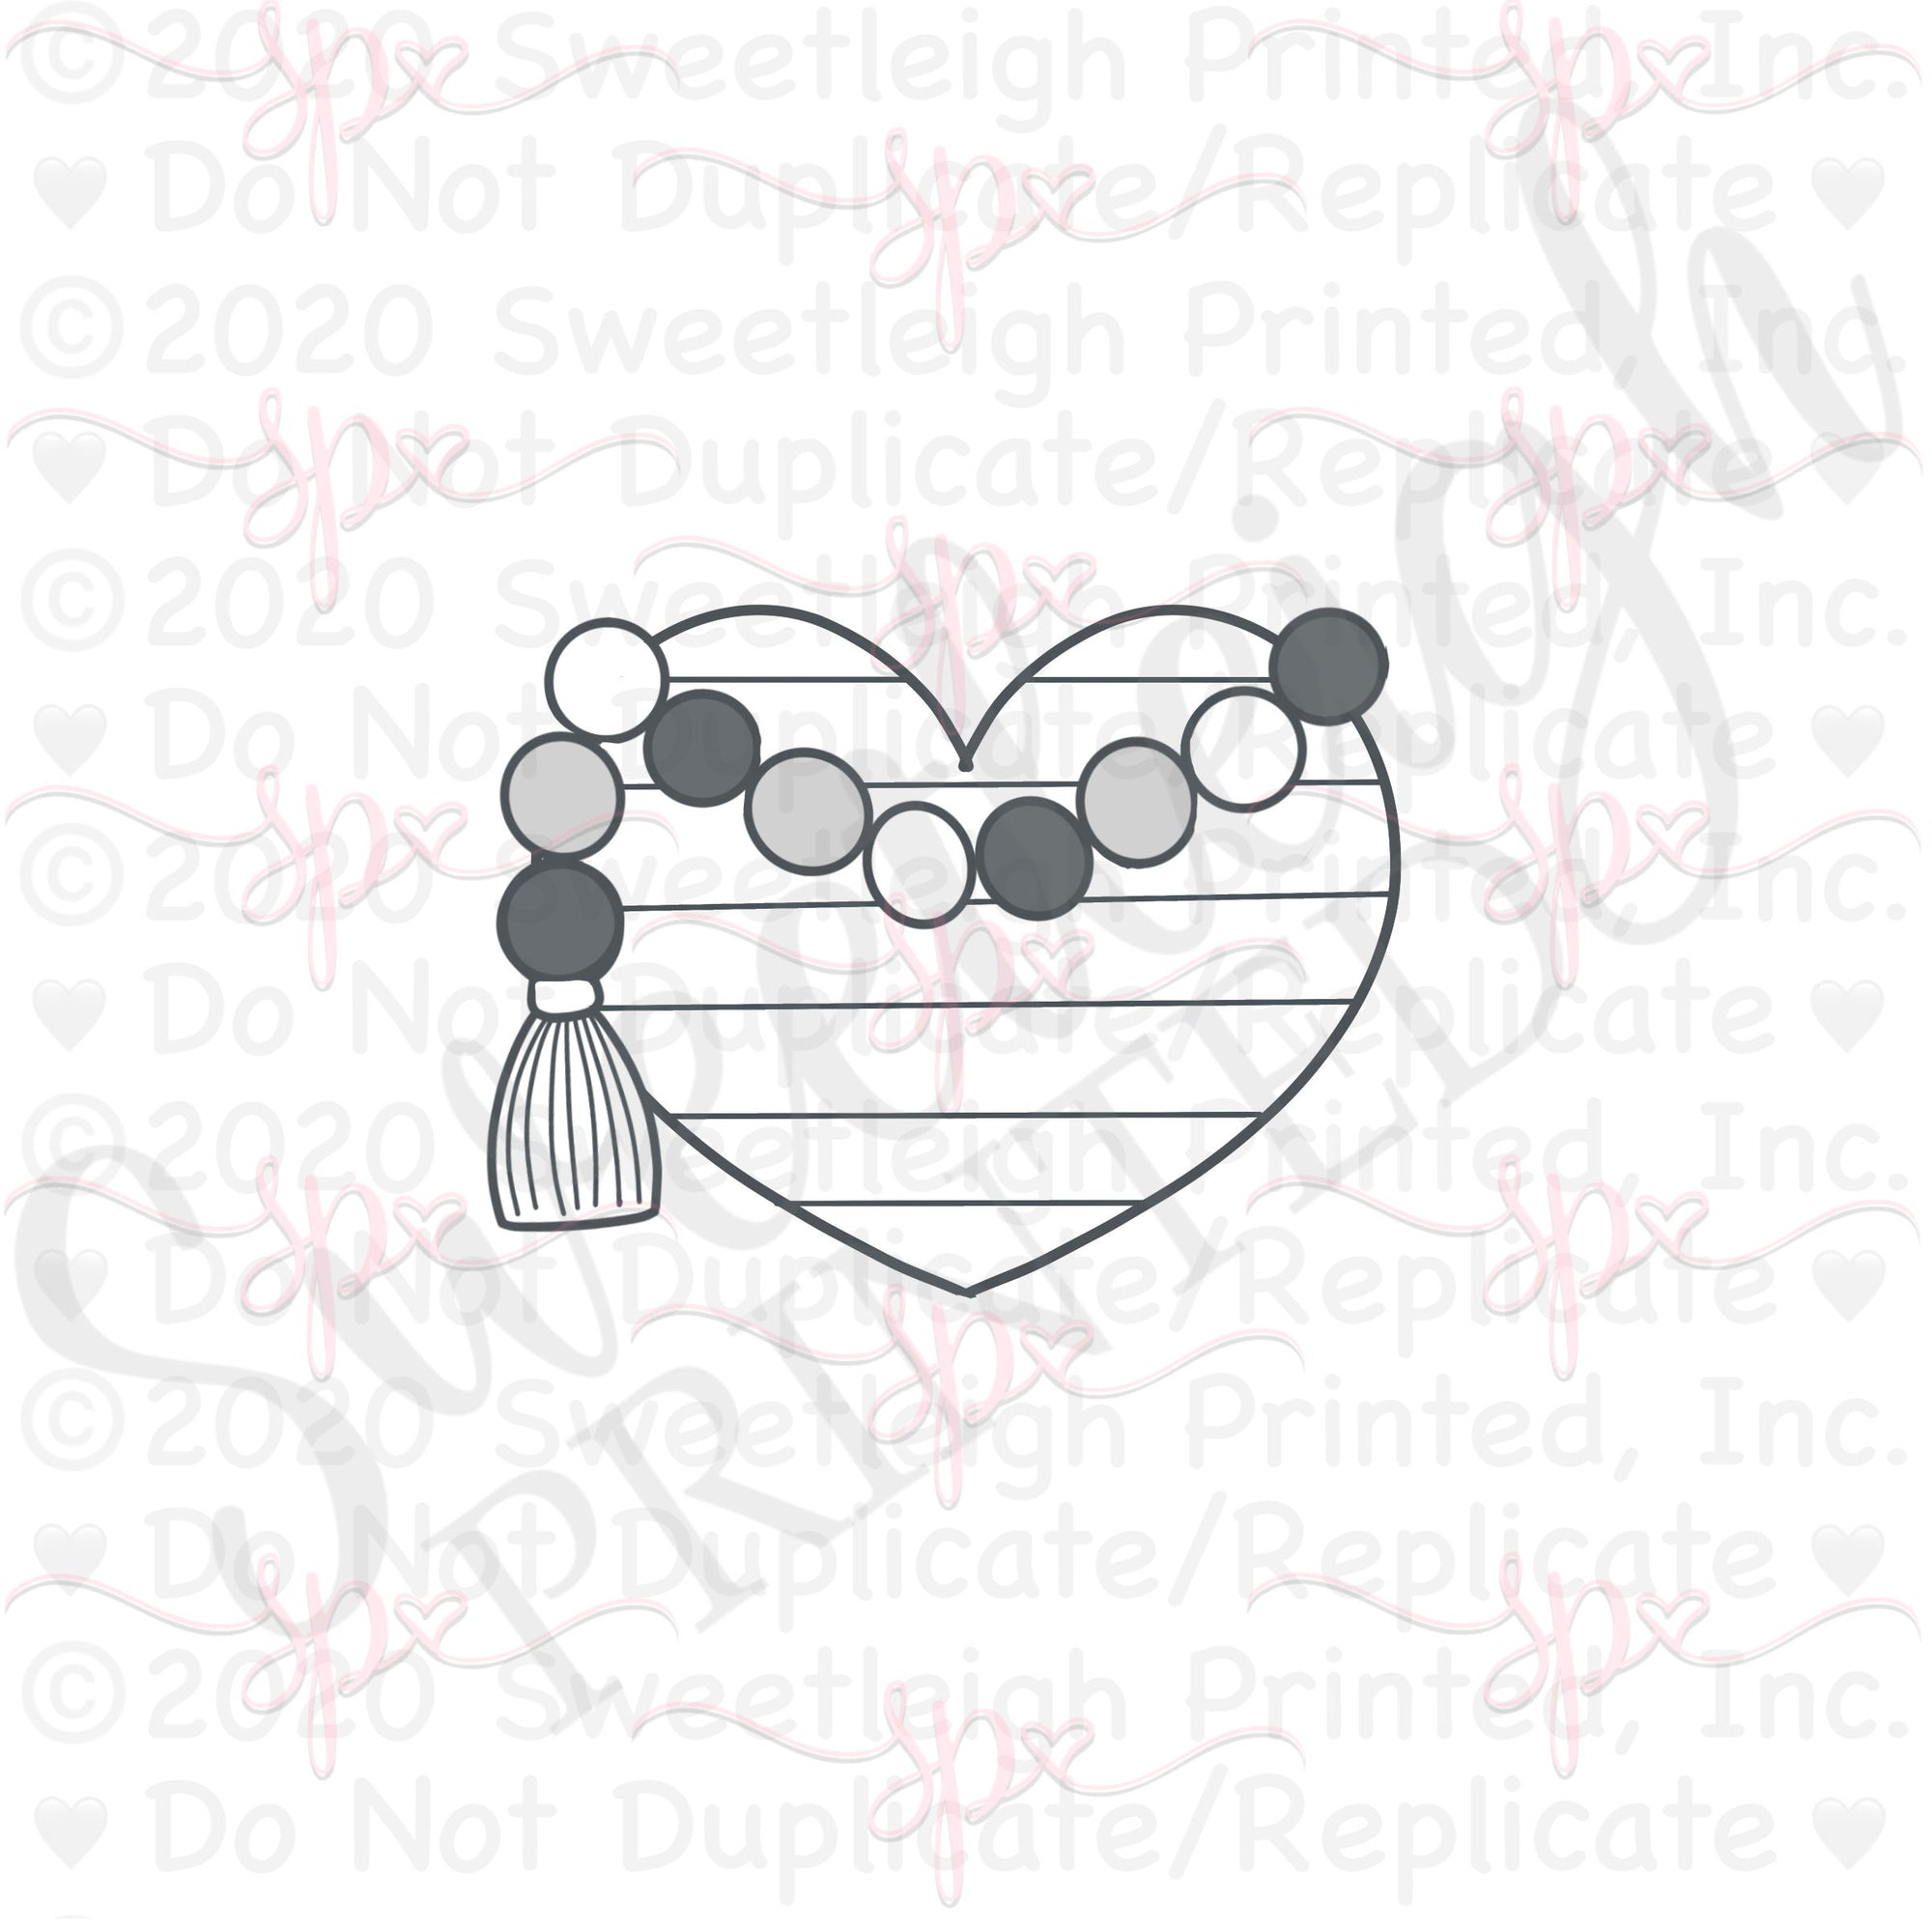 Beaded Chubby Heart 2020 Cookie Cutter